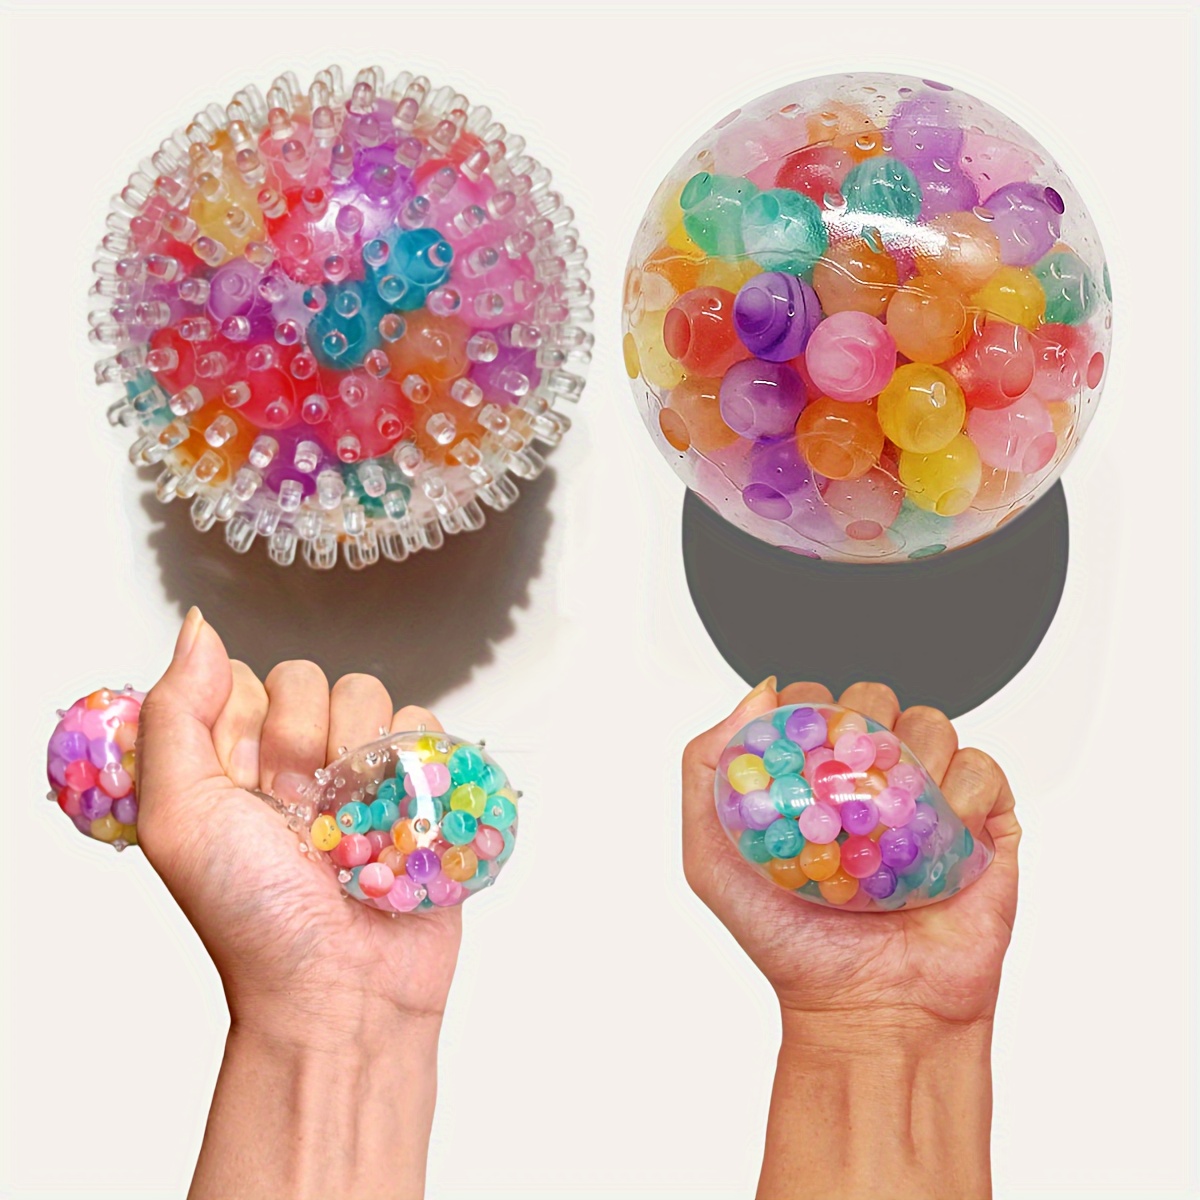 

2-piece Squishy Squeeze Balls - Soothing Toys For All Ages, Ideal For Party Favors, Birthday Gifts & Goodie Bags